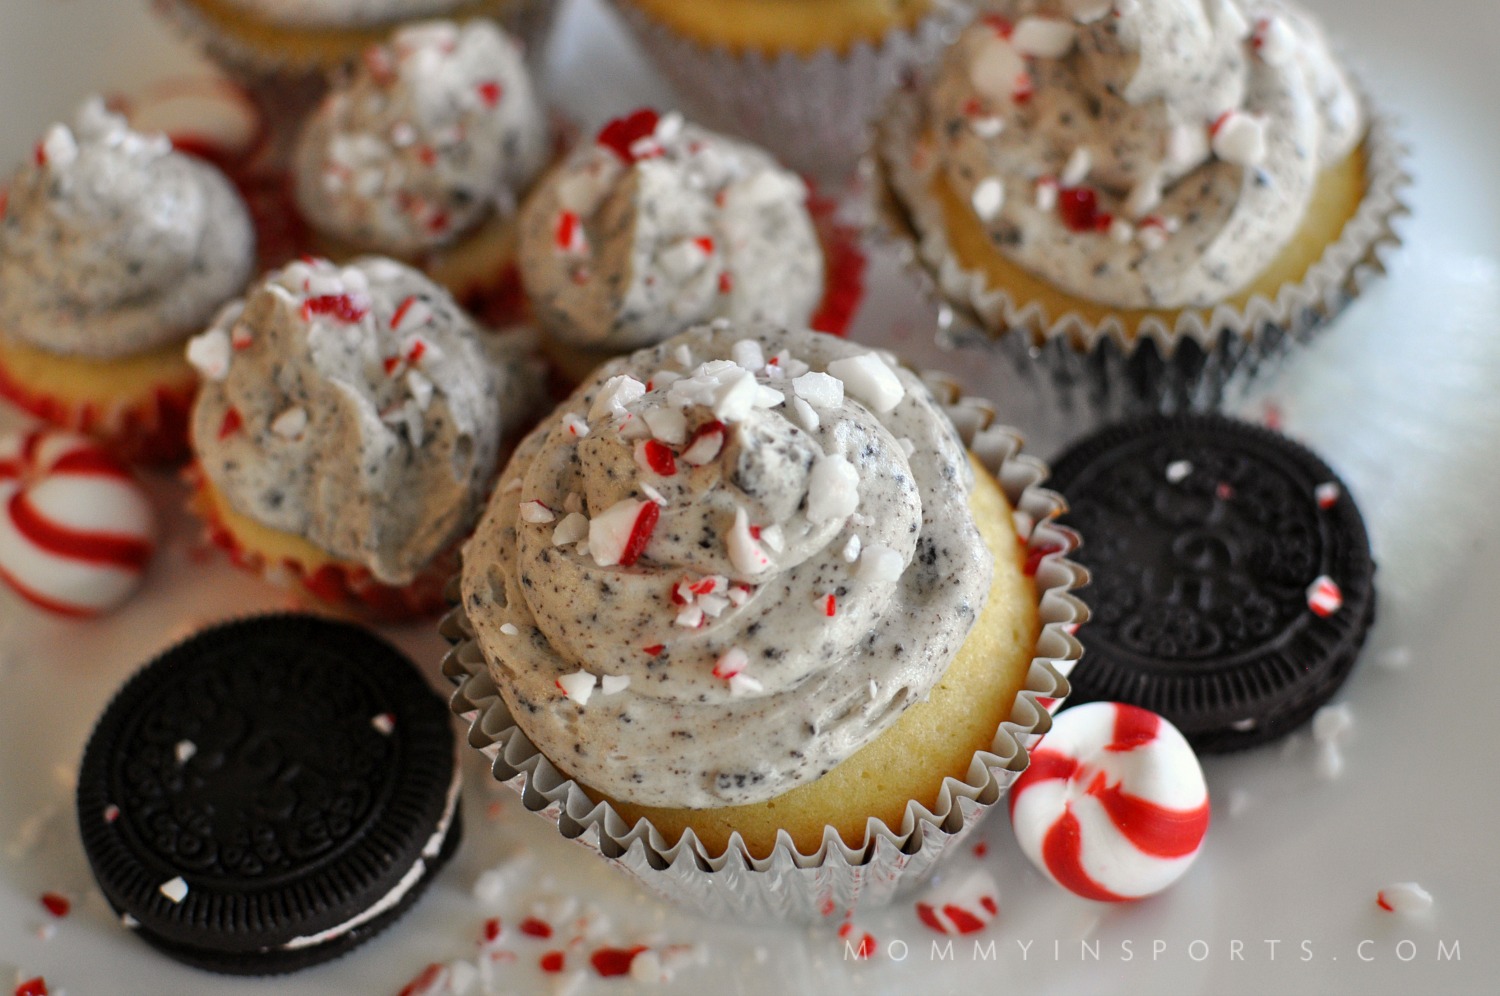 Looking for the perfect vanilla peppermint cupcakes recipe? Try these with some homemade peppermint Oreo frosting! Will spice up any holiday party!